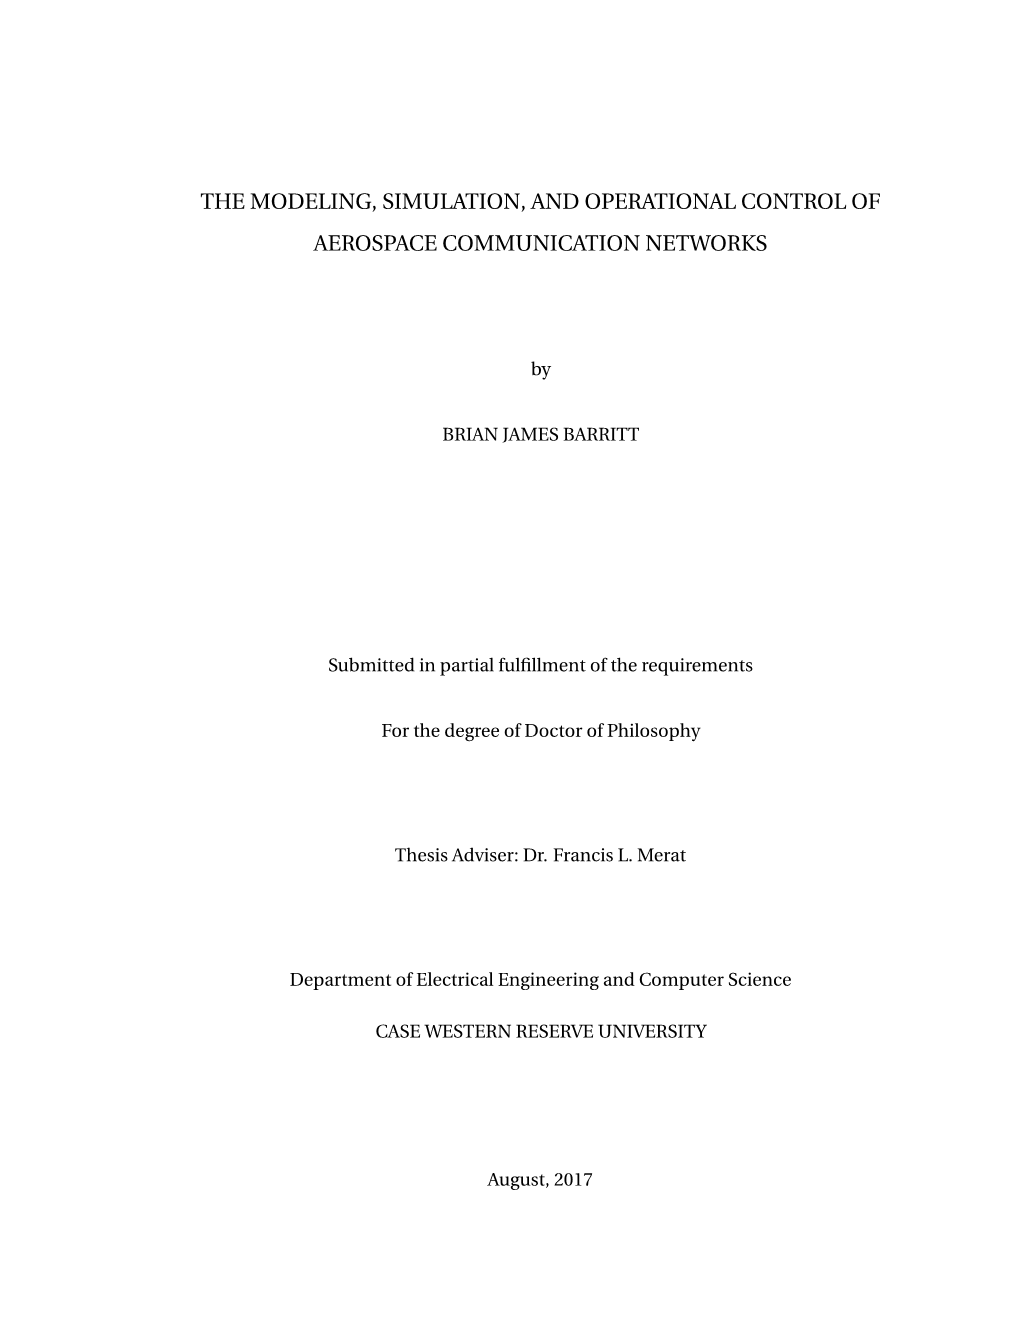 The Modeling, Simulation, and Operational Control of Aerospace Communication Networks